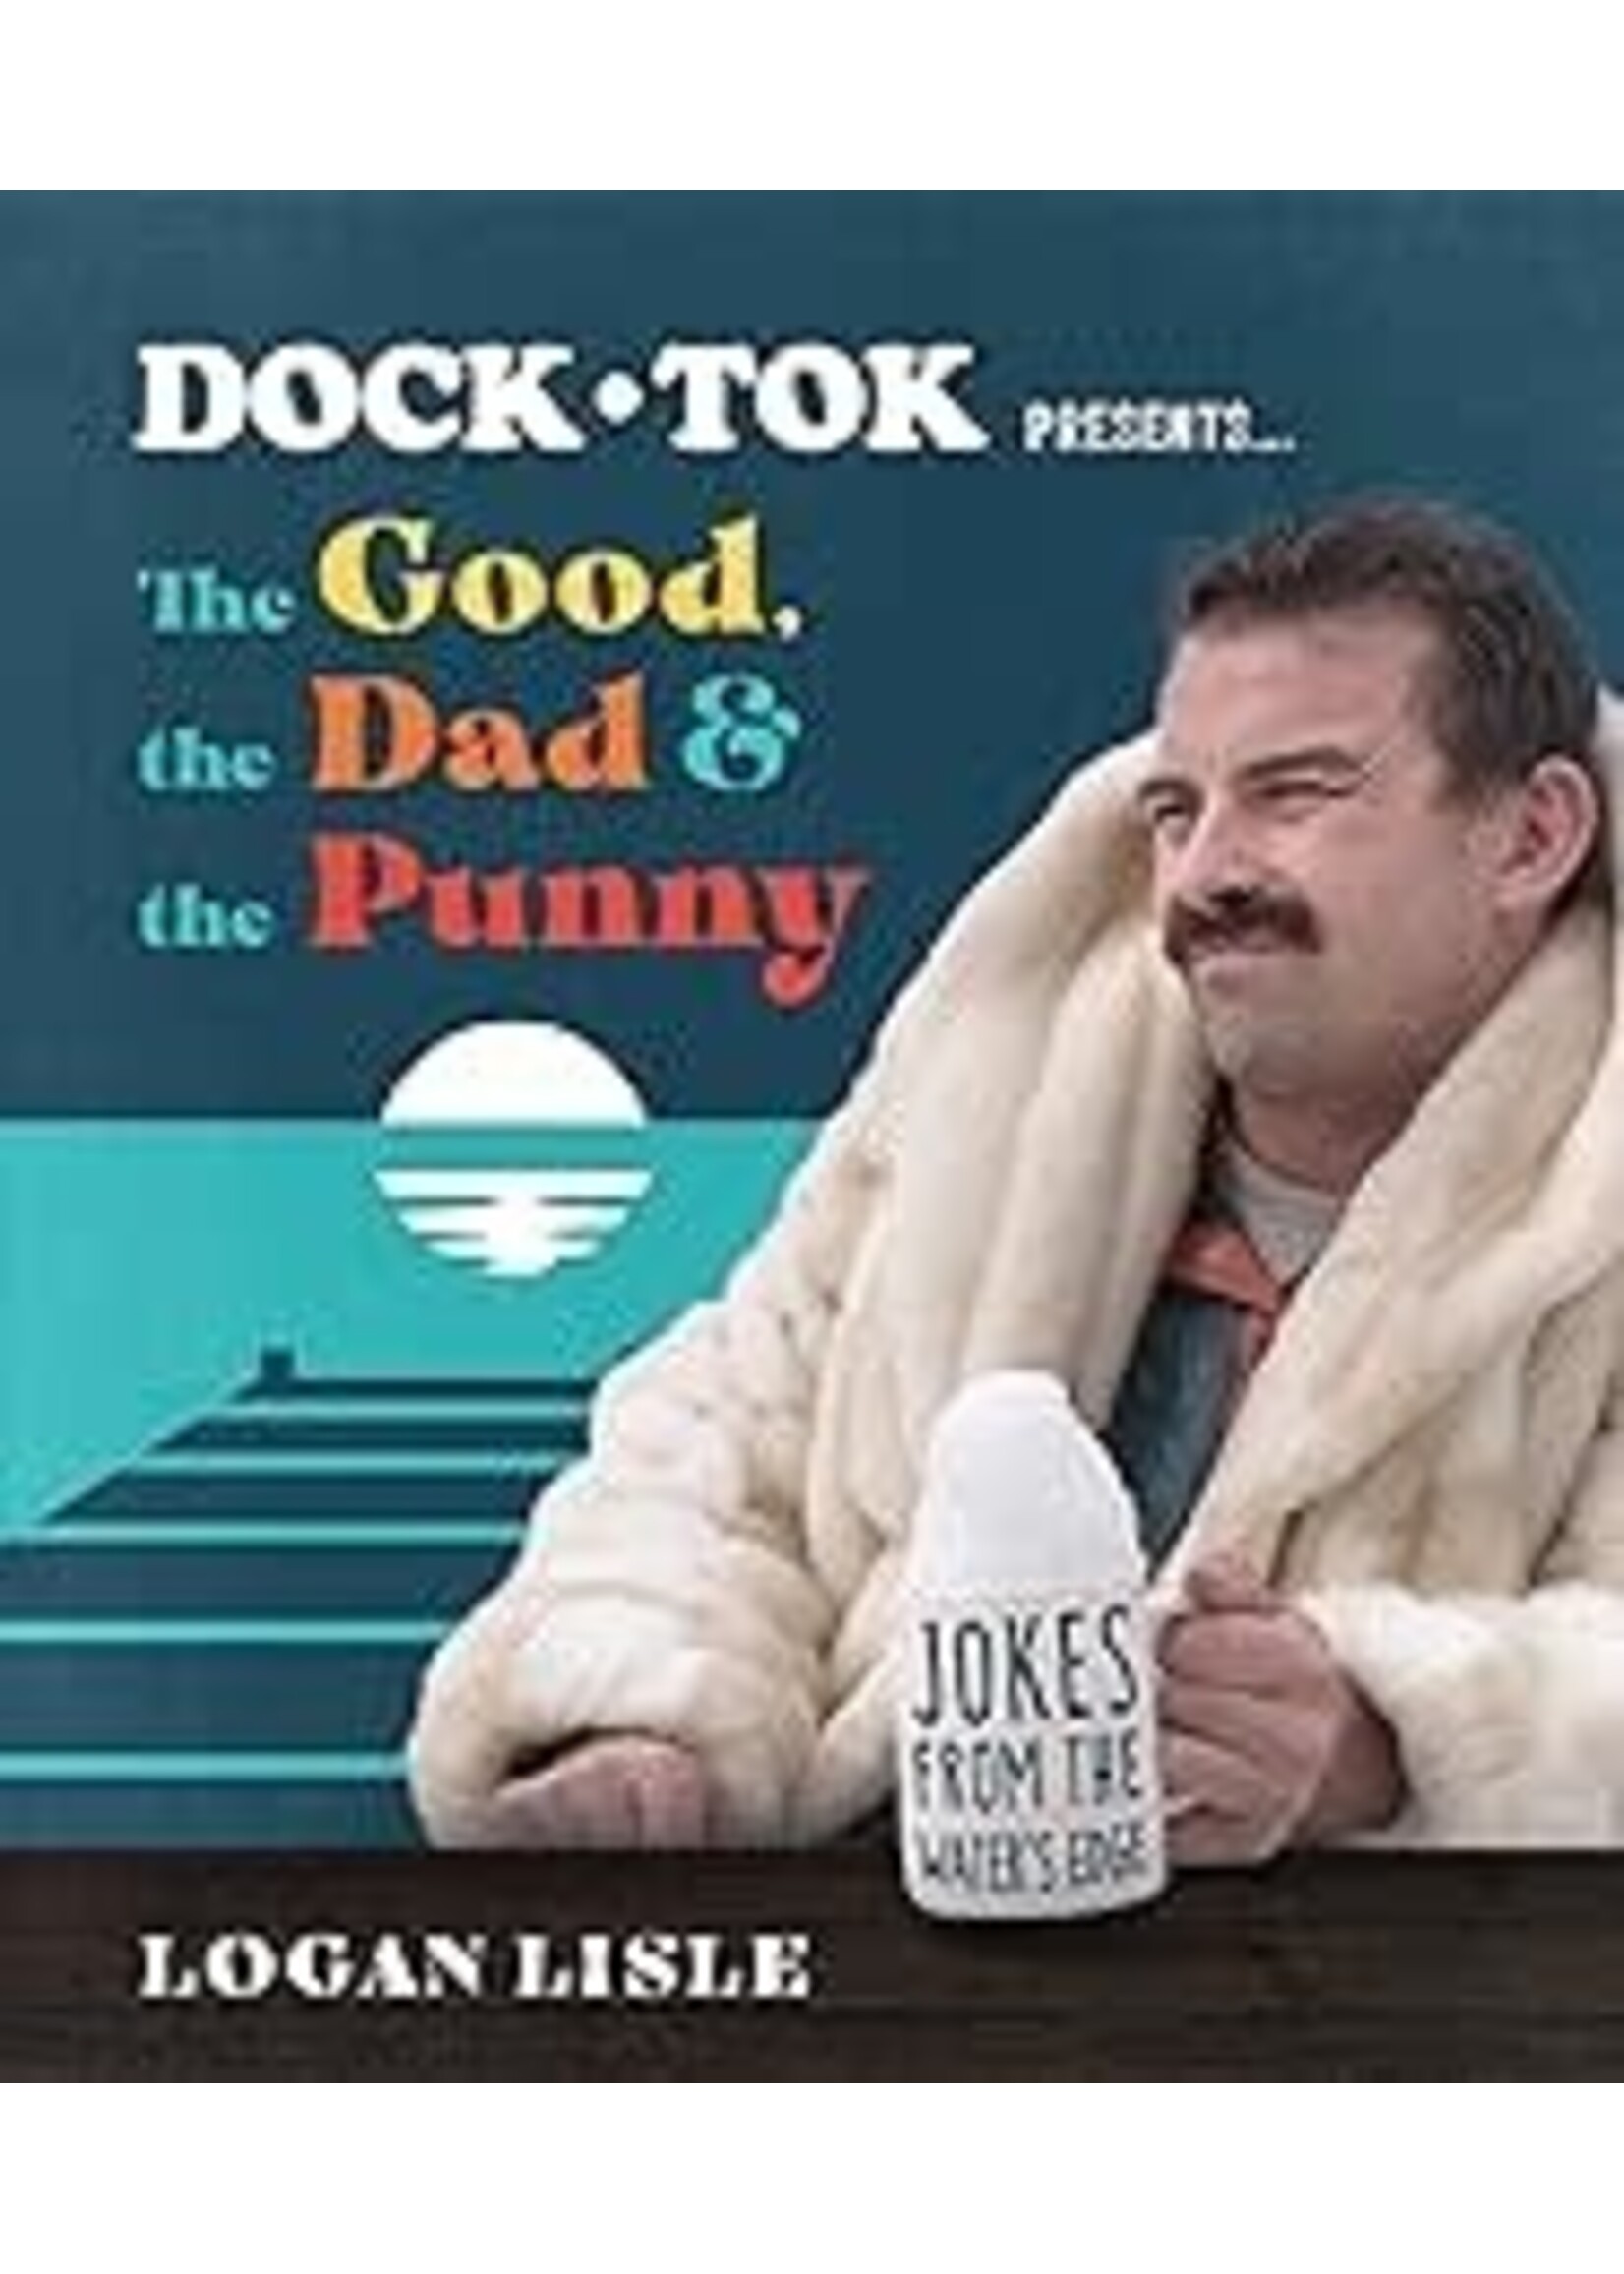 Dock Tok Presents the Good the Bad and the Punny